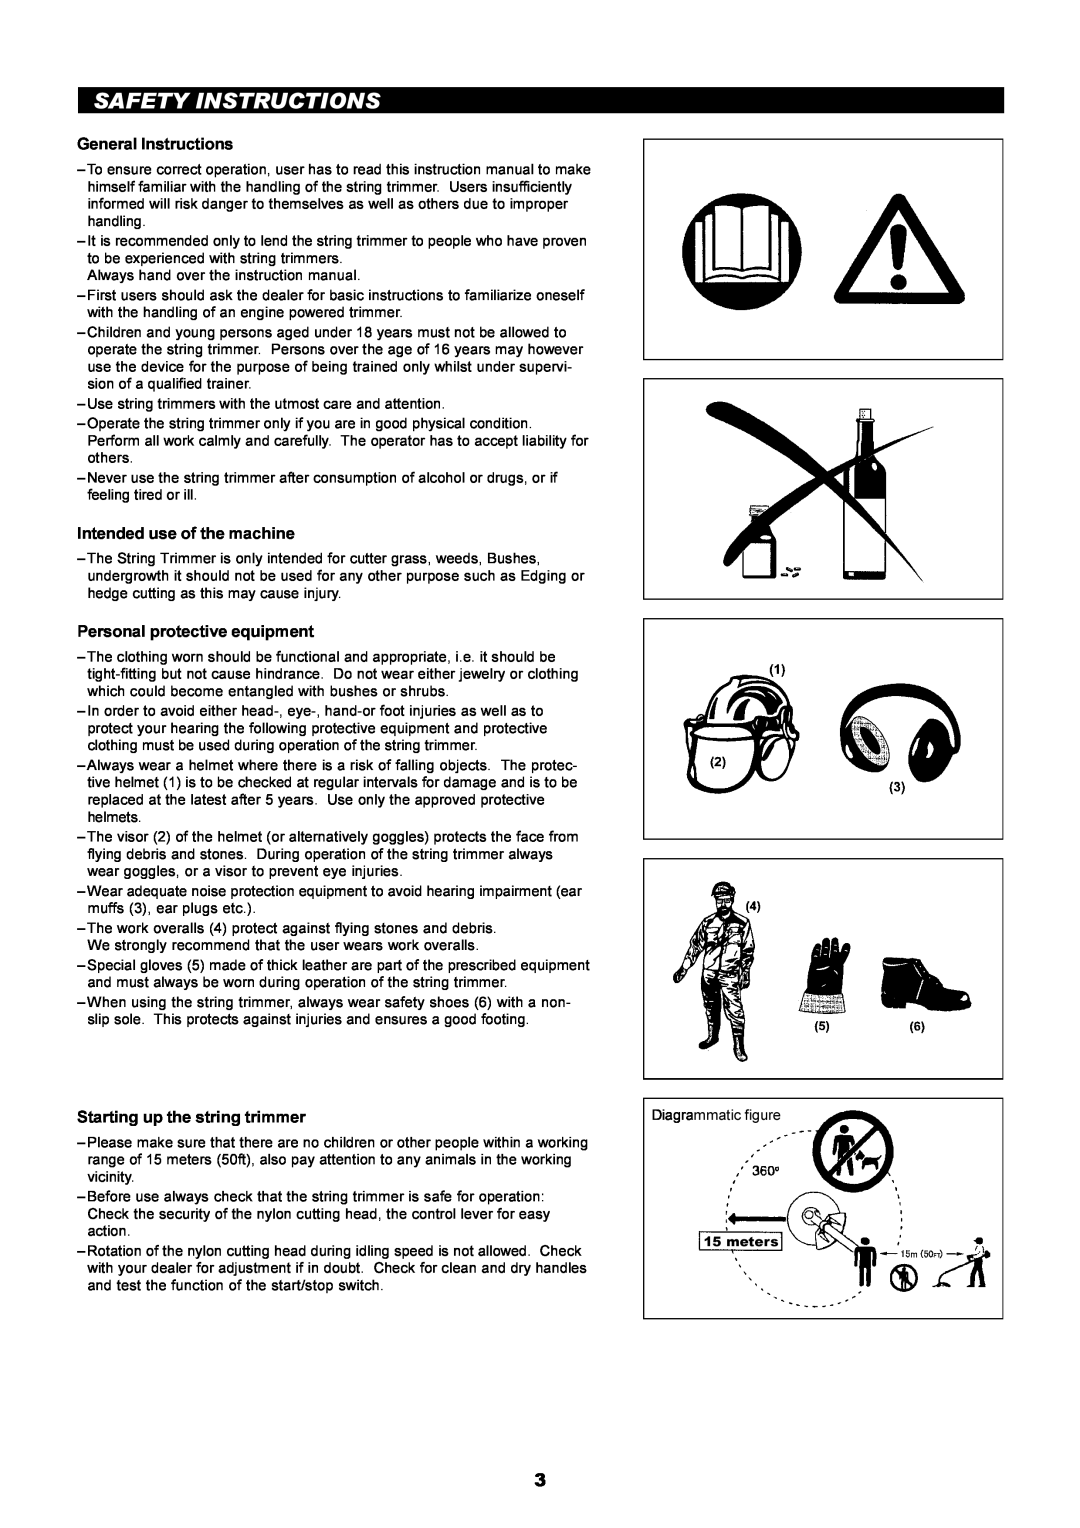 Makita LT-210 Safety Instructions, General Instructions, Intended use of the machine, Personal protective equipment 